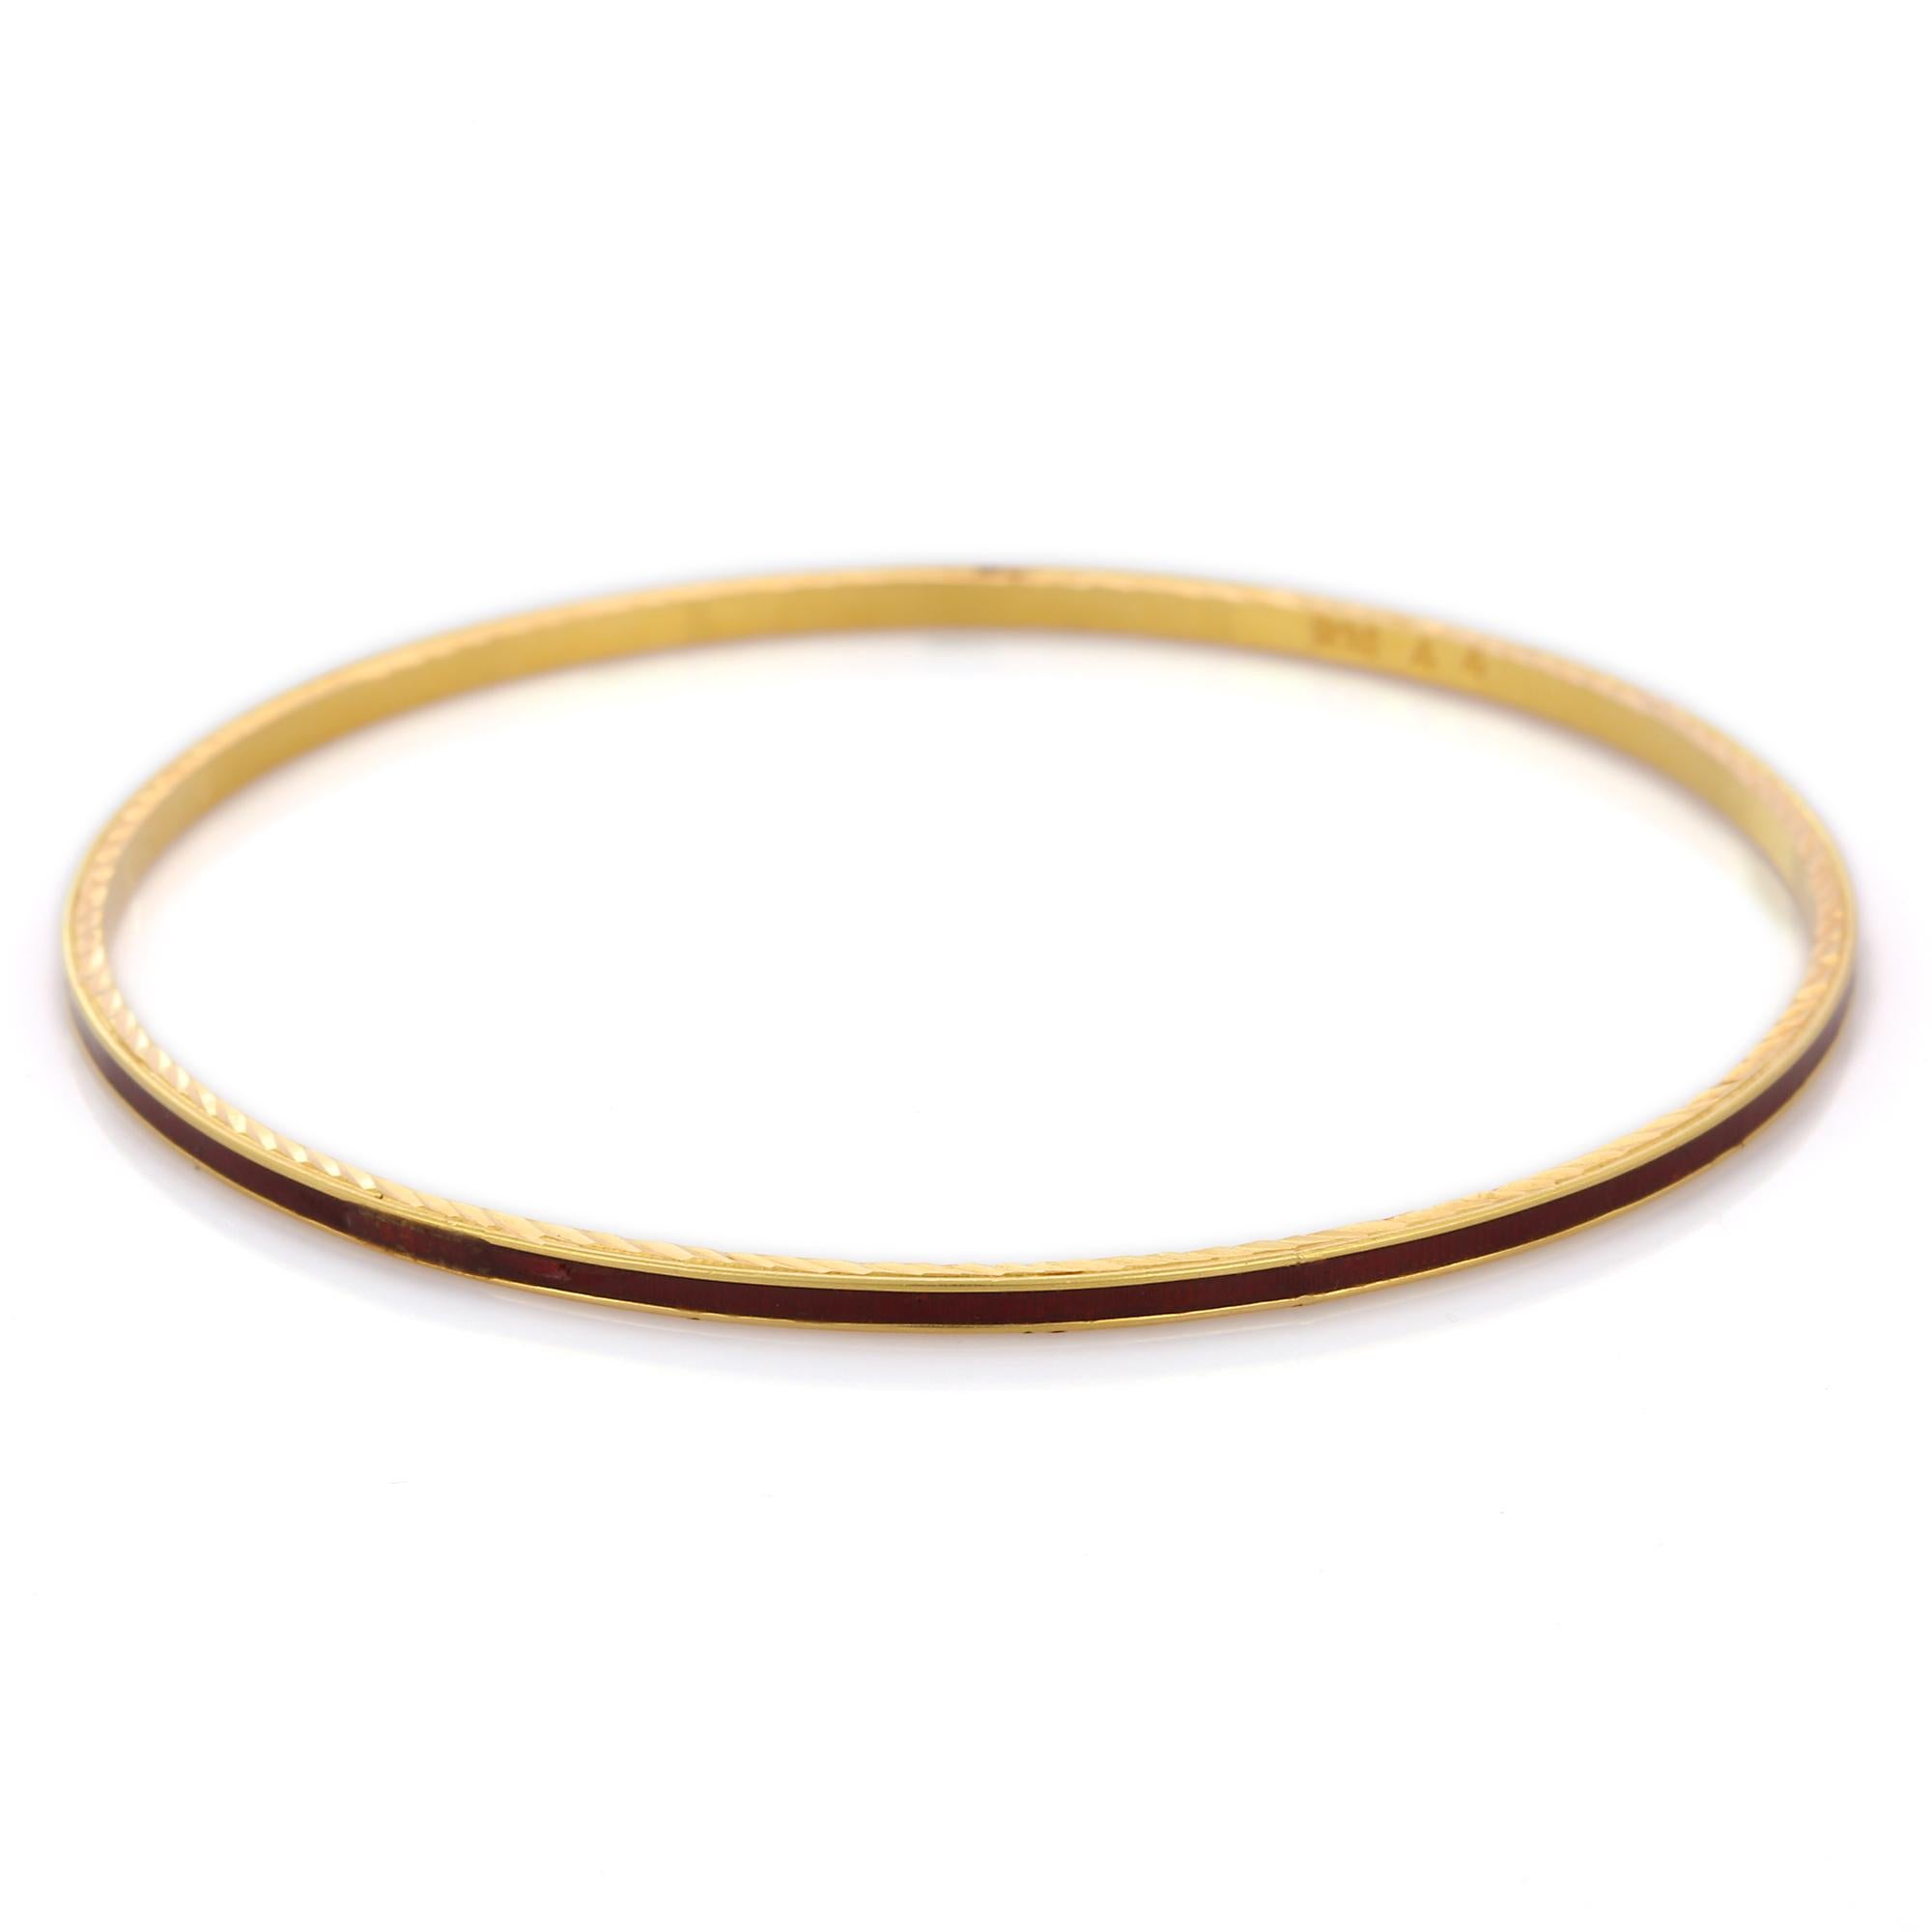 Ruby Enameled Bangle in 18K Gold. It’s a great jewelry ornament to wear on occasions and at the same time works as a wonderful gift for your loved ones. These lovely statement pieces are perfect generation jewelry to pass on.
Bangles feel